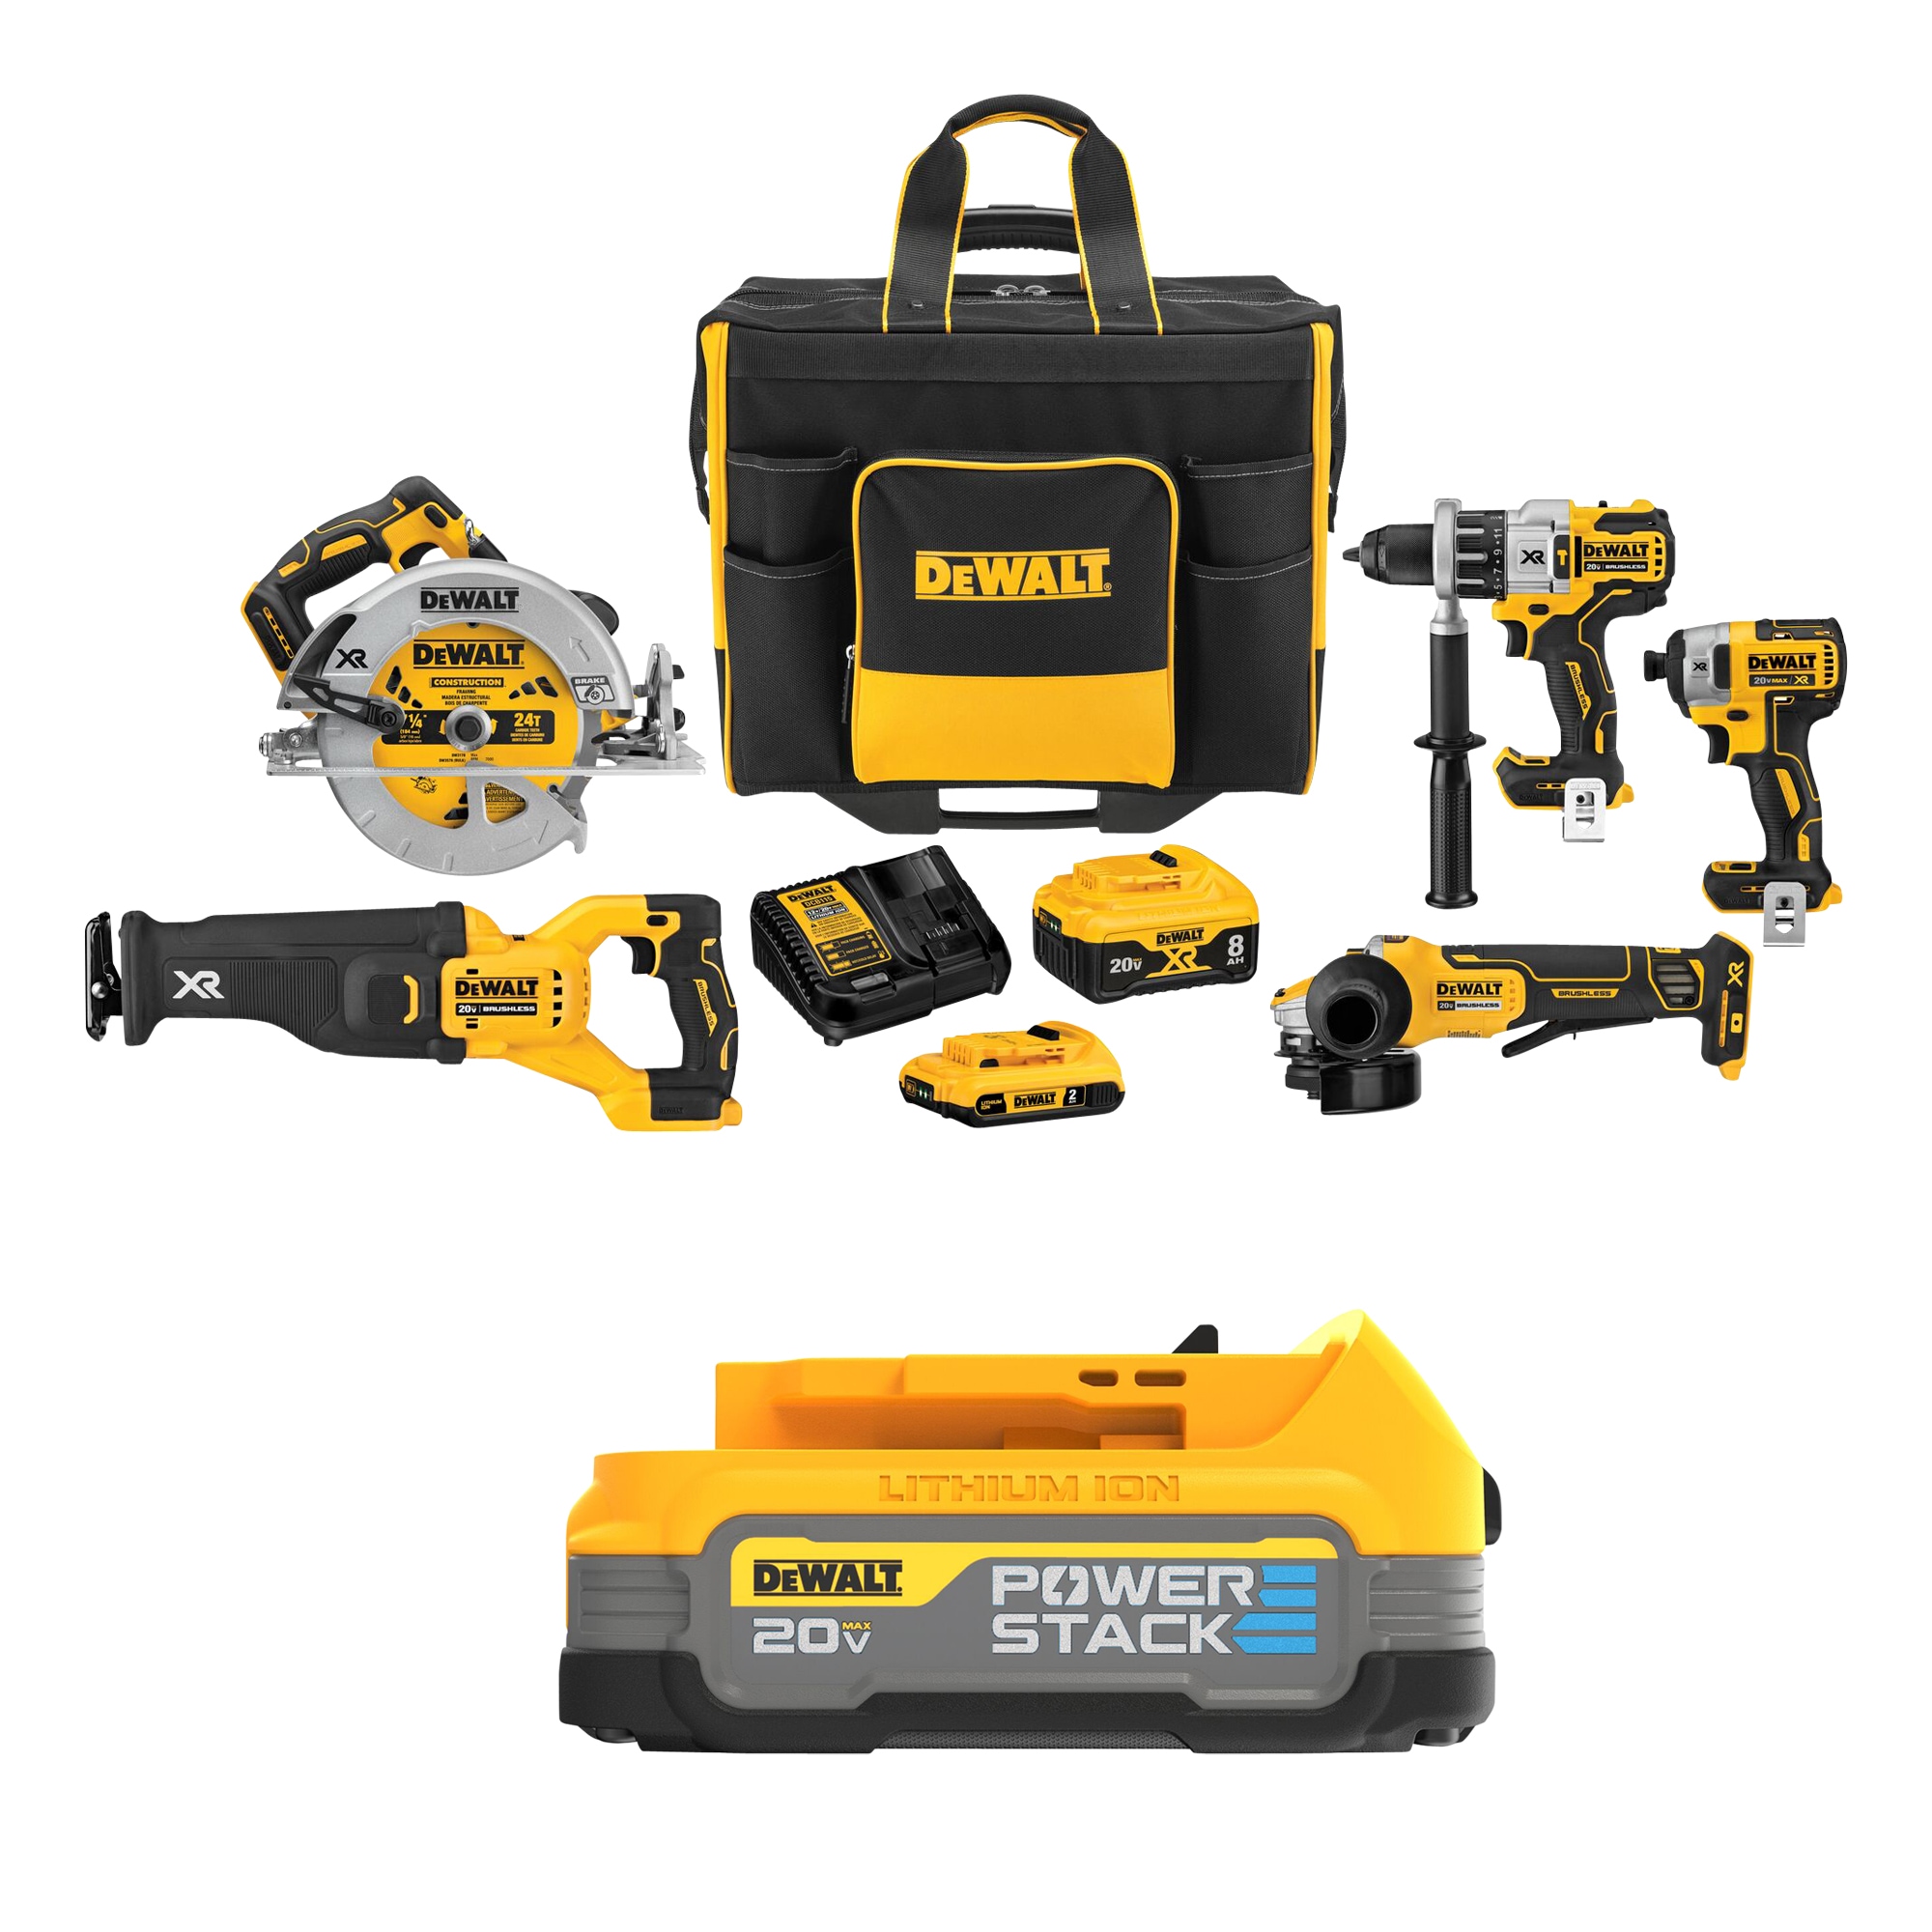 DEWALT 20V MAX XR Brushless Cordless 5-Tool Combo Kit with Large Site-Ready Rolling Bag & 20V MAX POWERSTACK Compact Battery